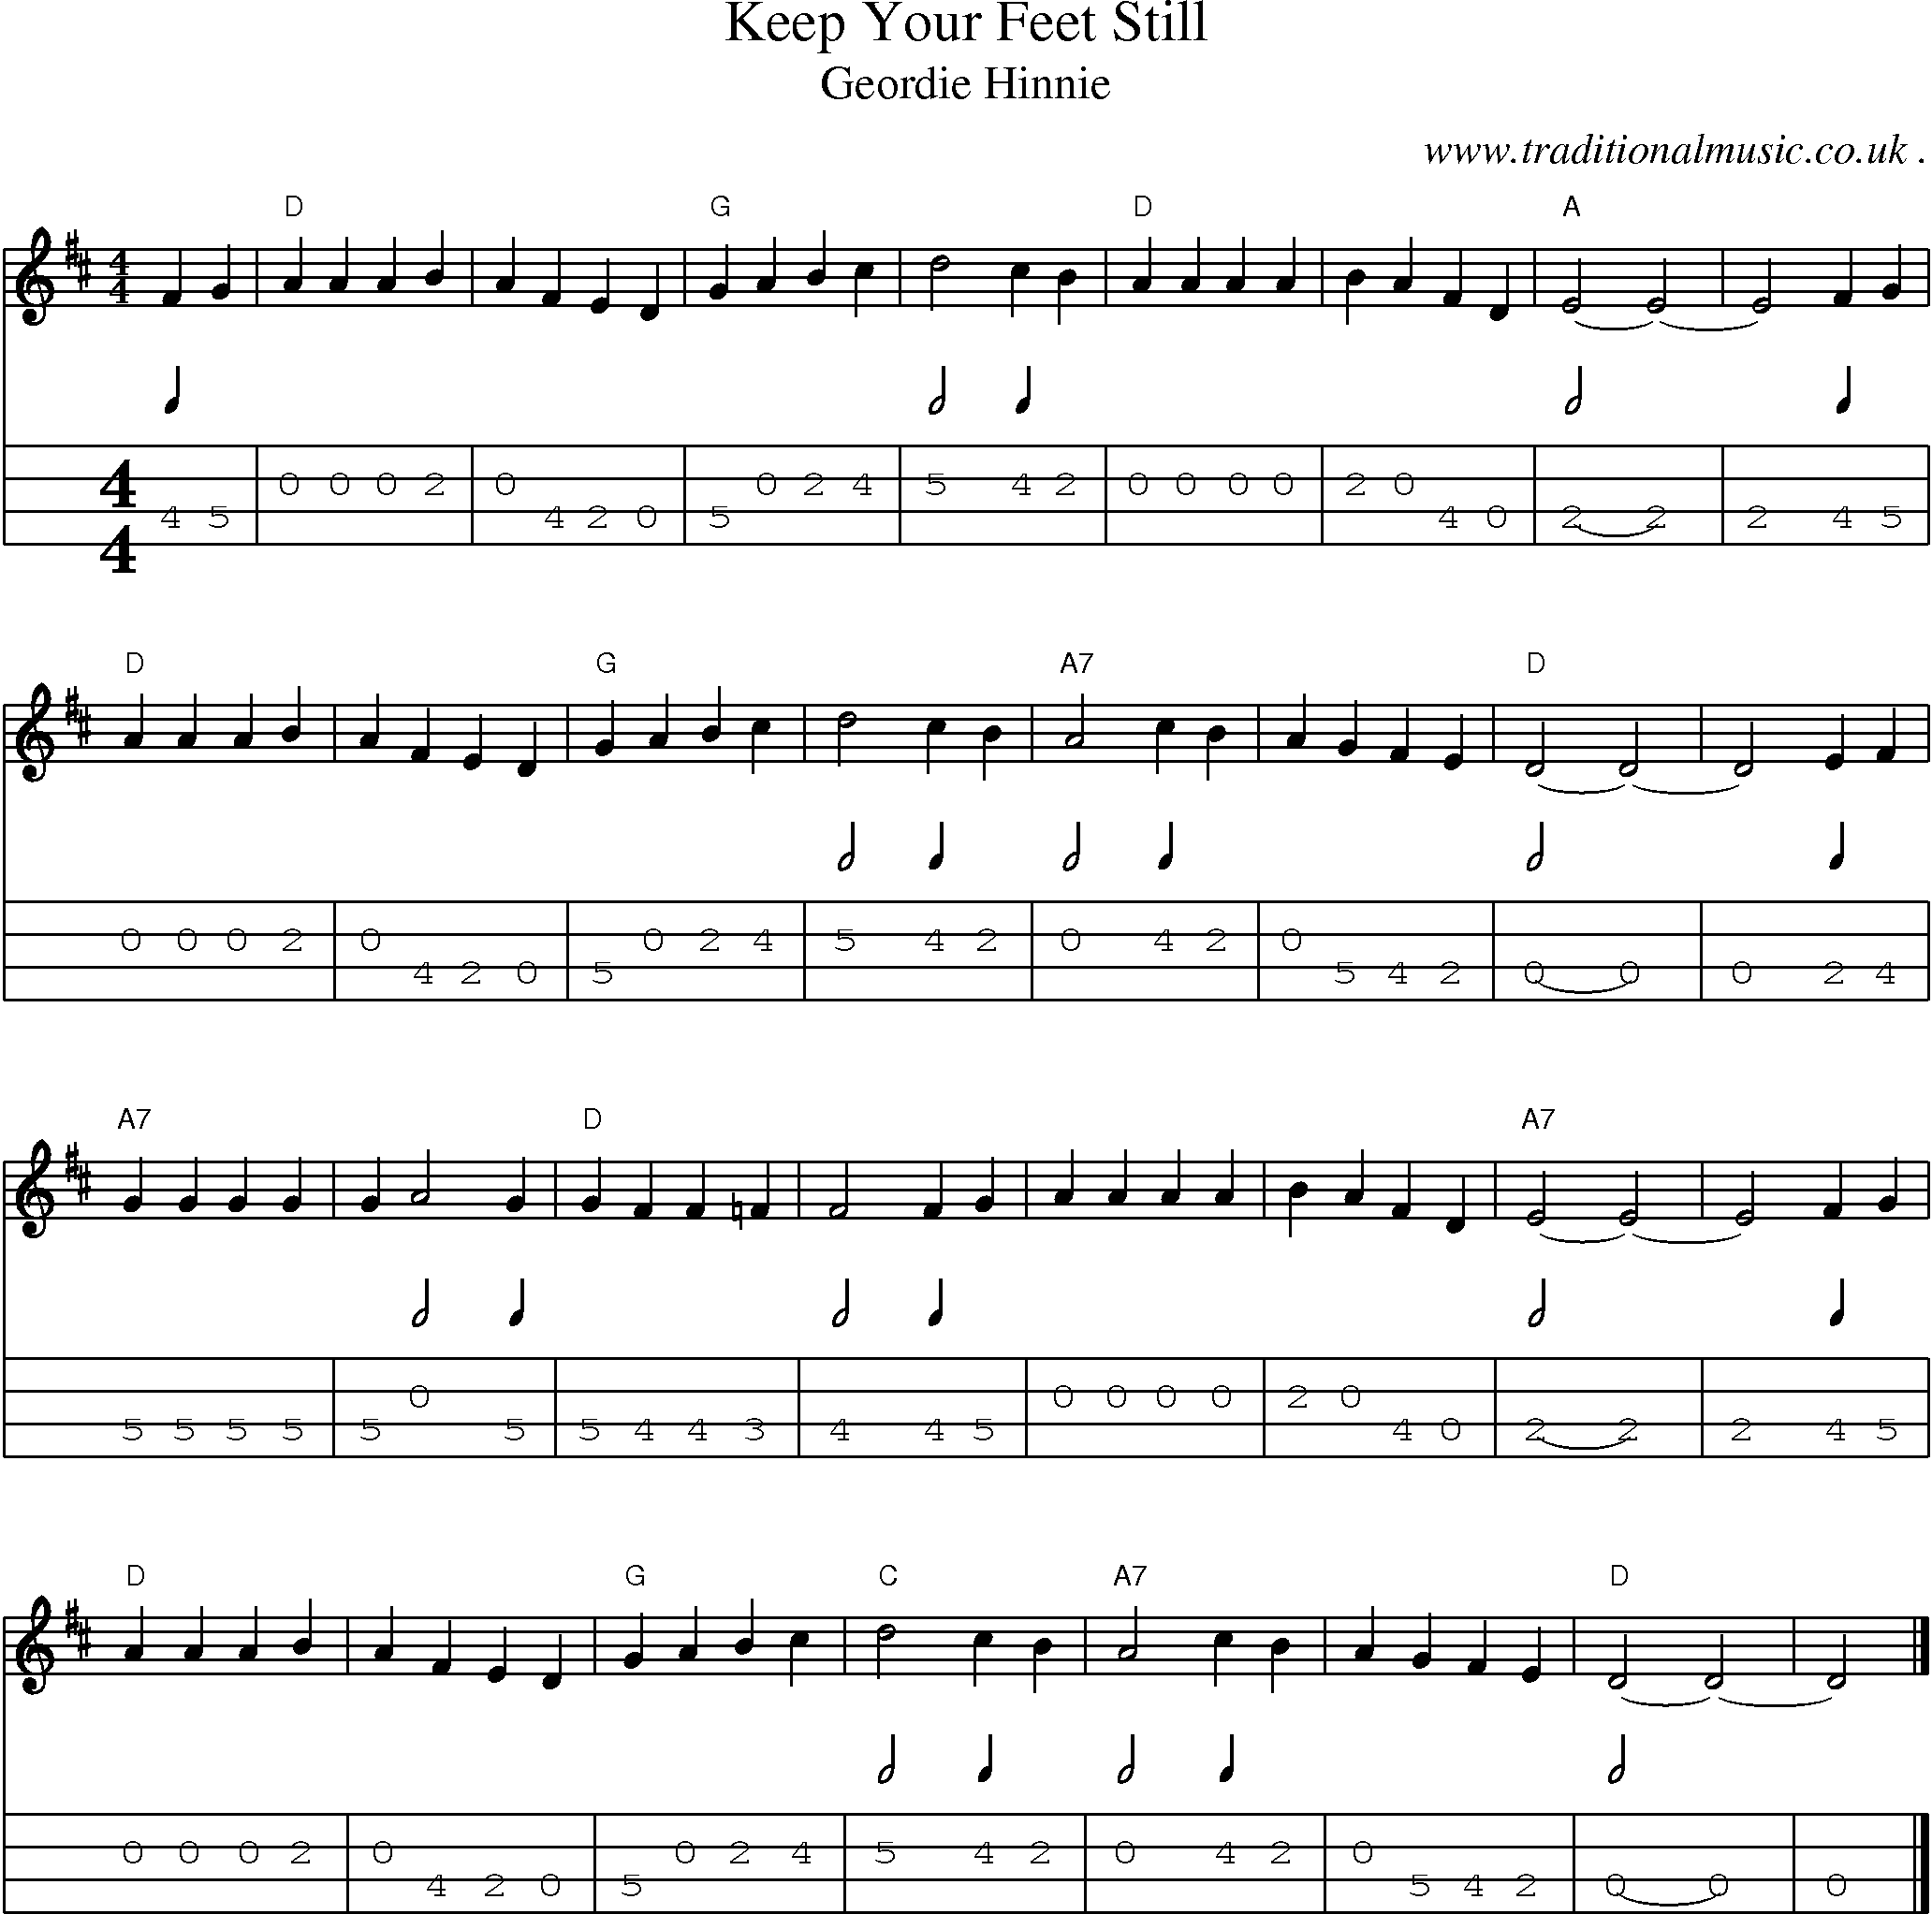 Music Score and Guitar Tabs for Keep Your Feet Still